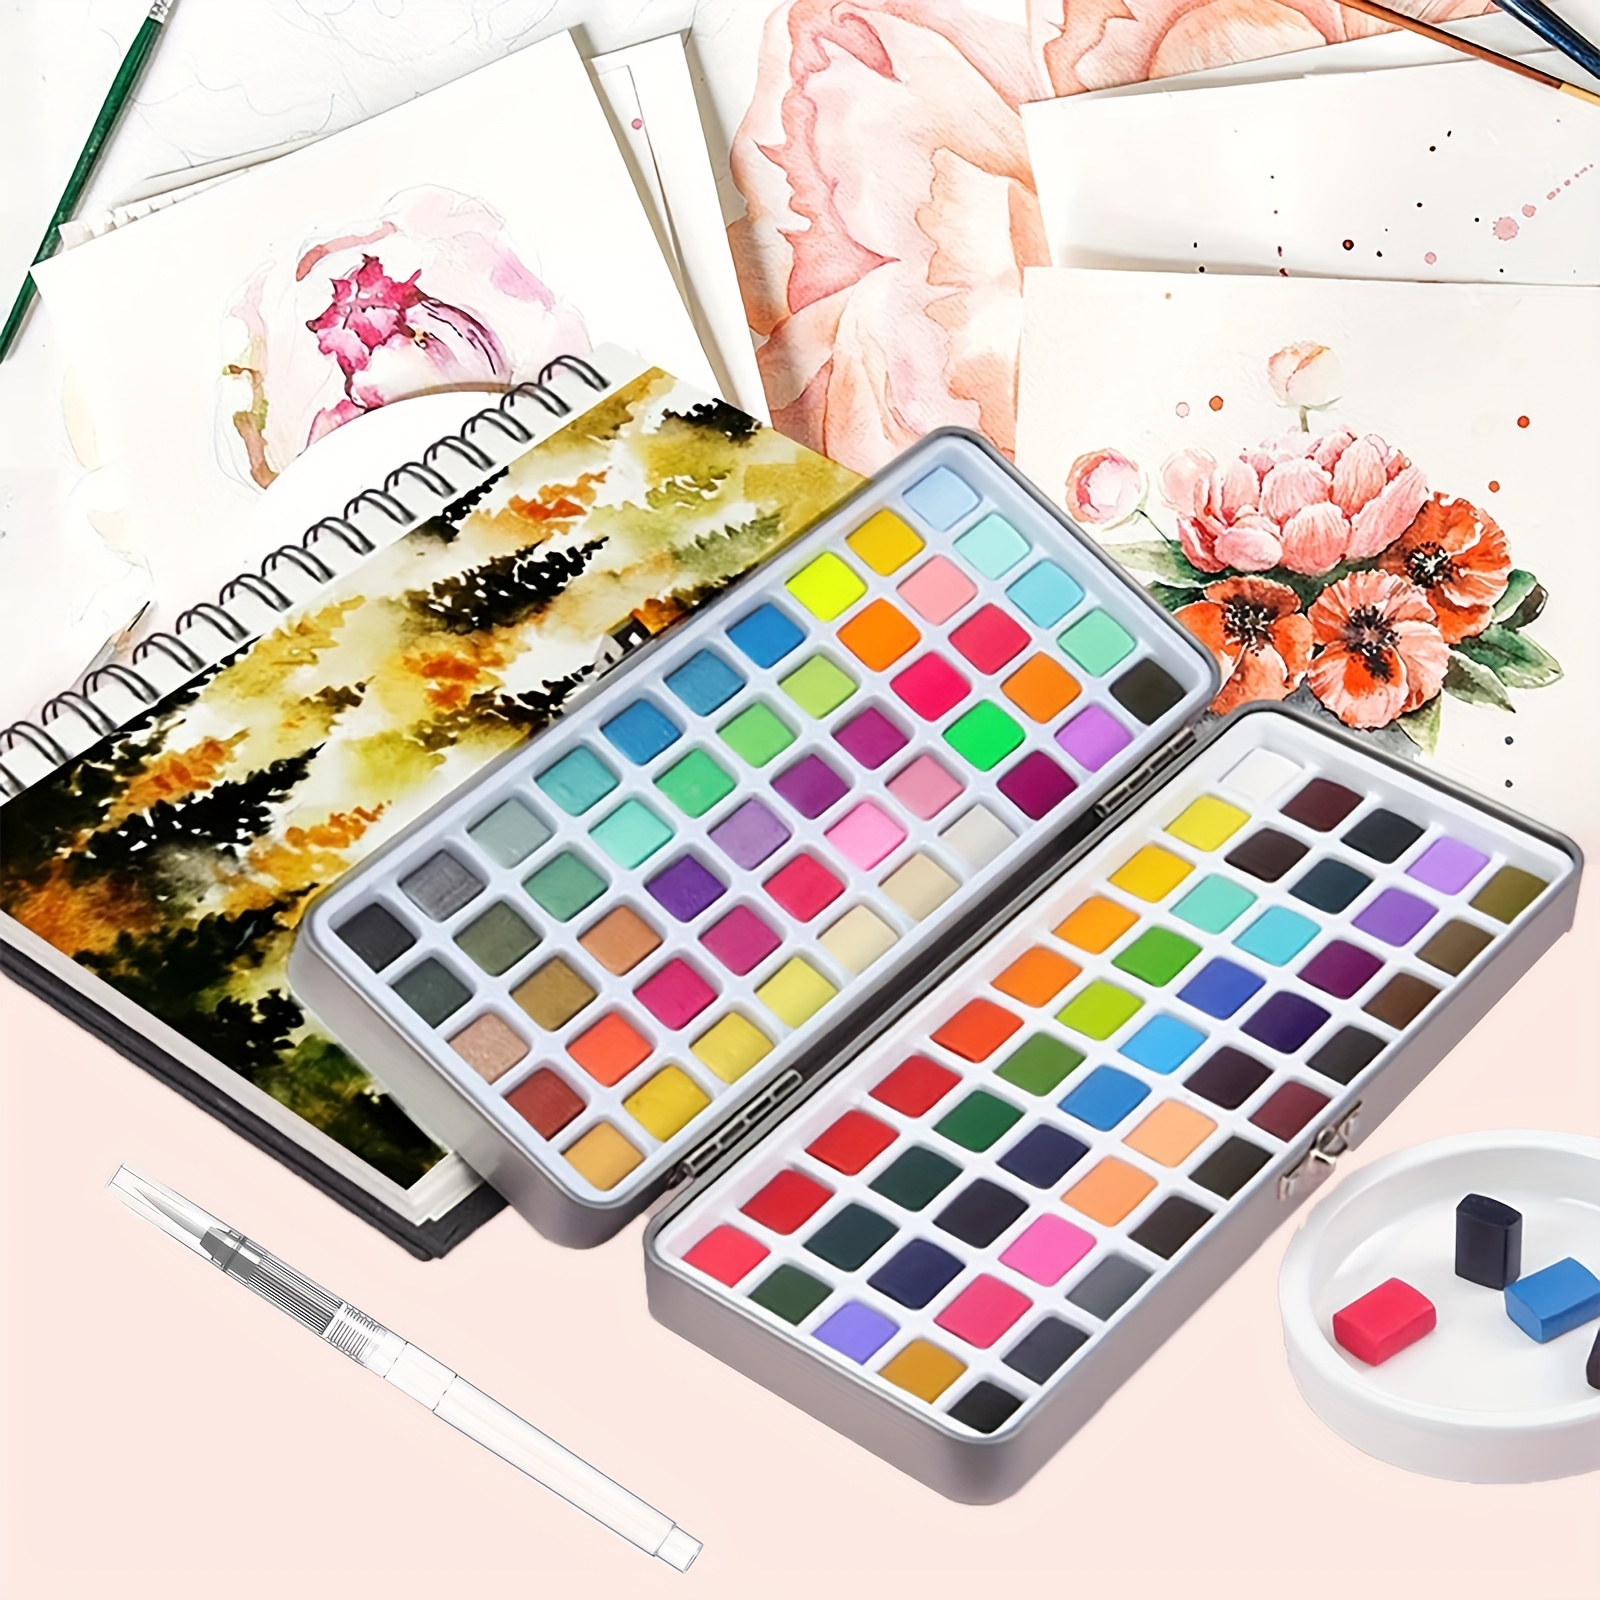 100-Color Watercolor Paint Set with Water Brush Pens and Pencil for Adults